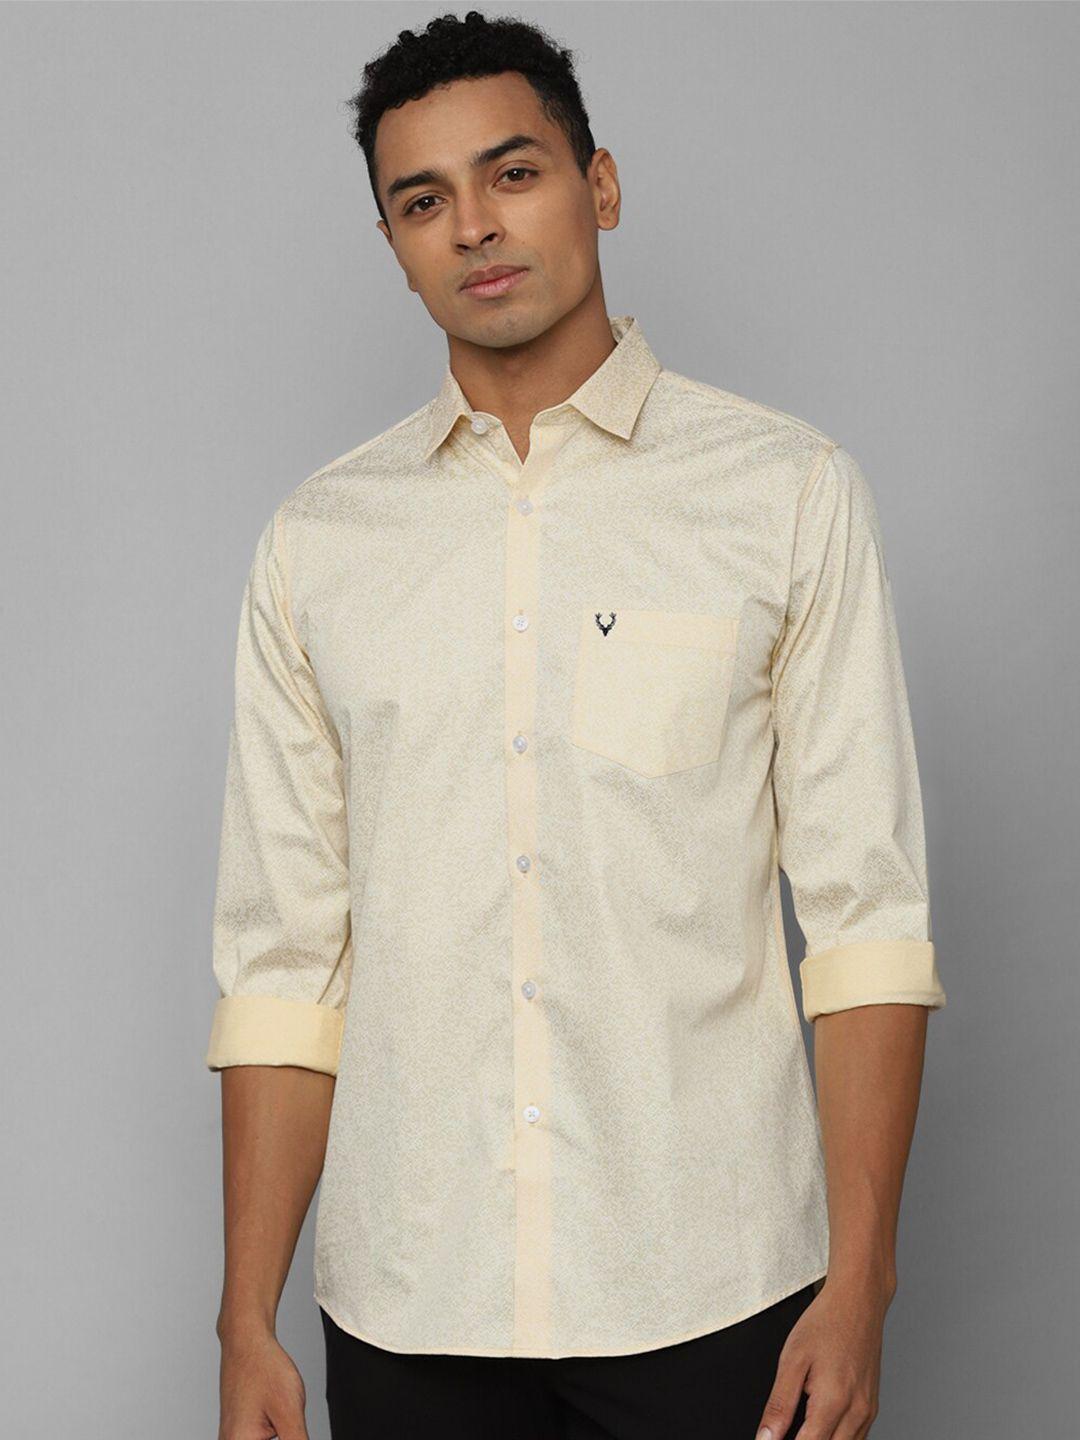 allen-solly-slim-fit-geometric-printed-pure-cotton-casual-shirt